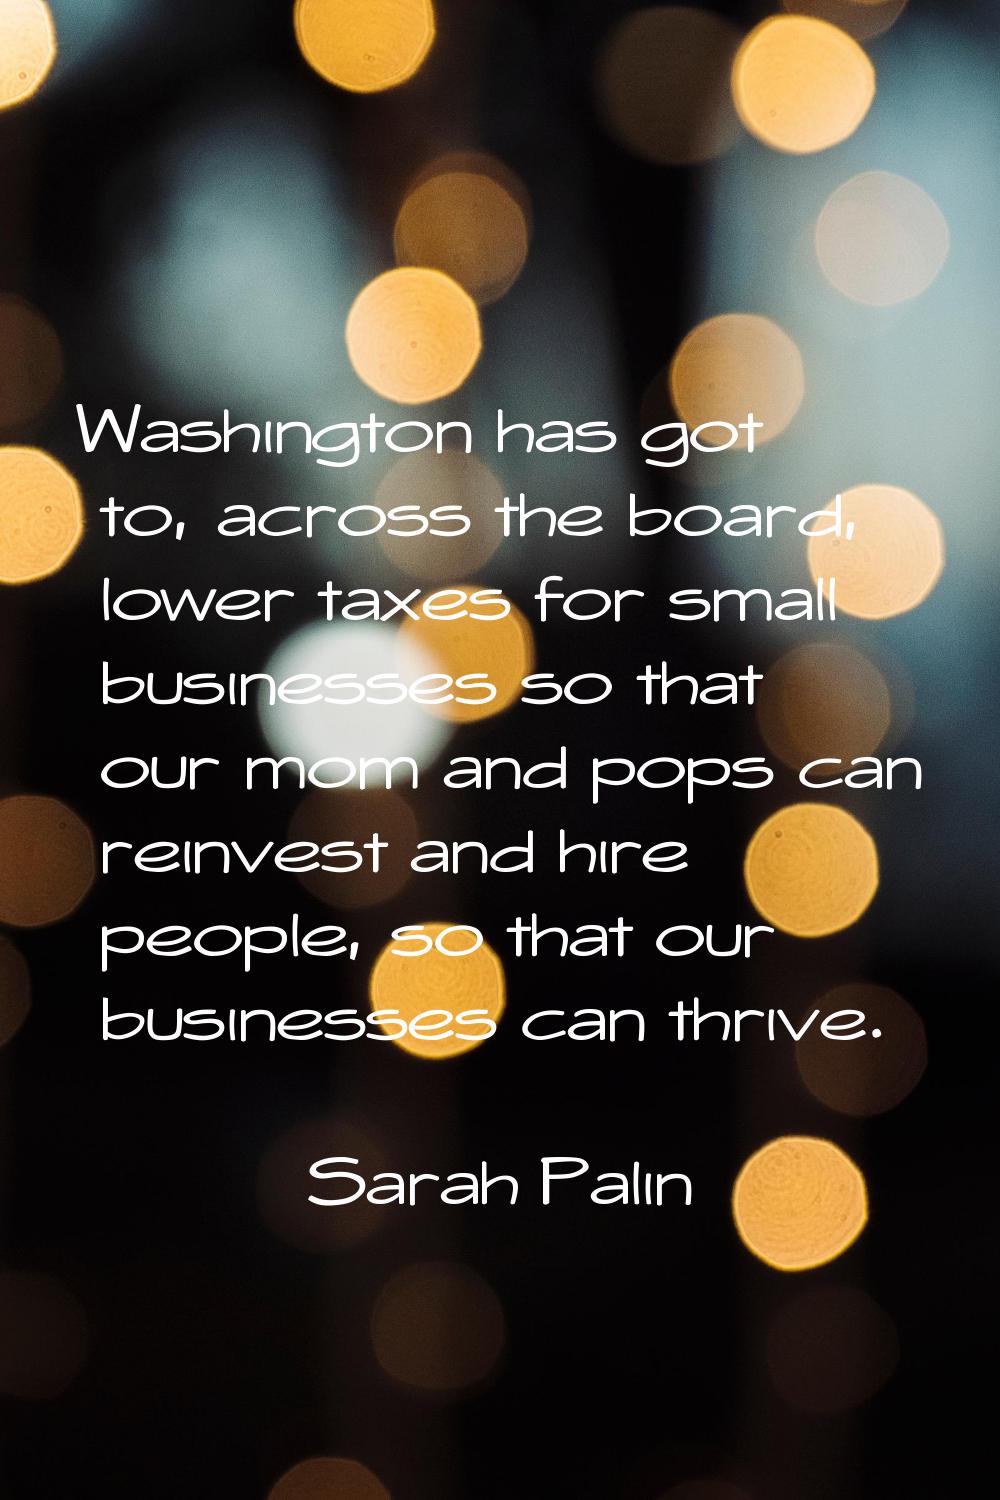 Washington has got to, across the board, lower taxes for small businesses so that our mom and pops 